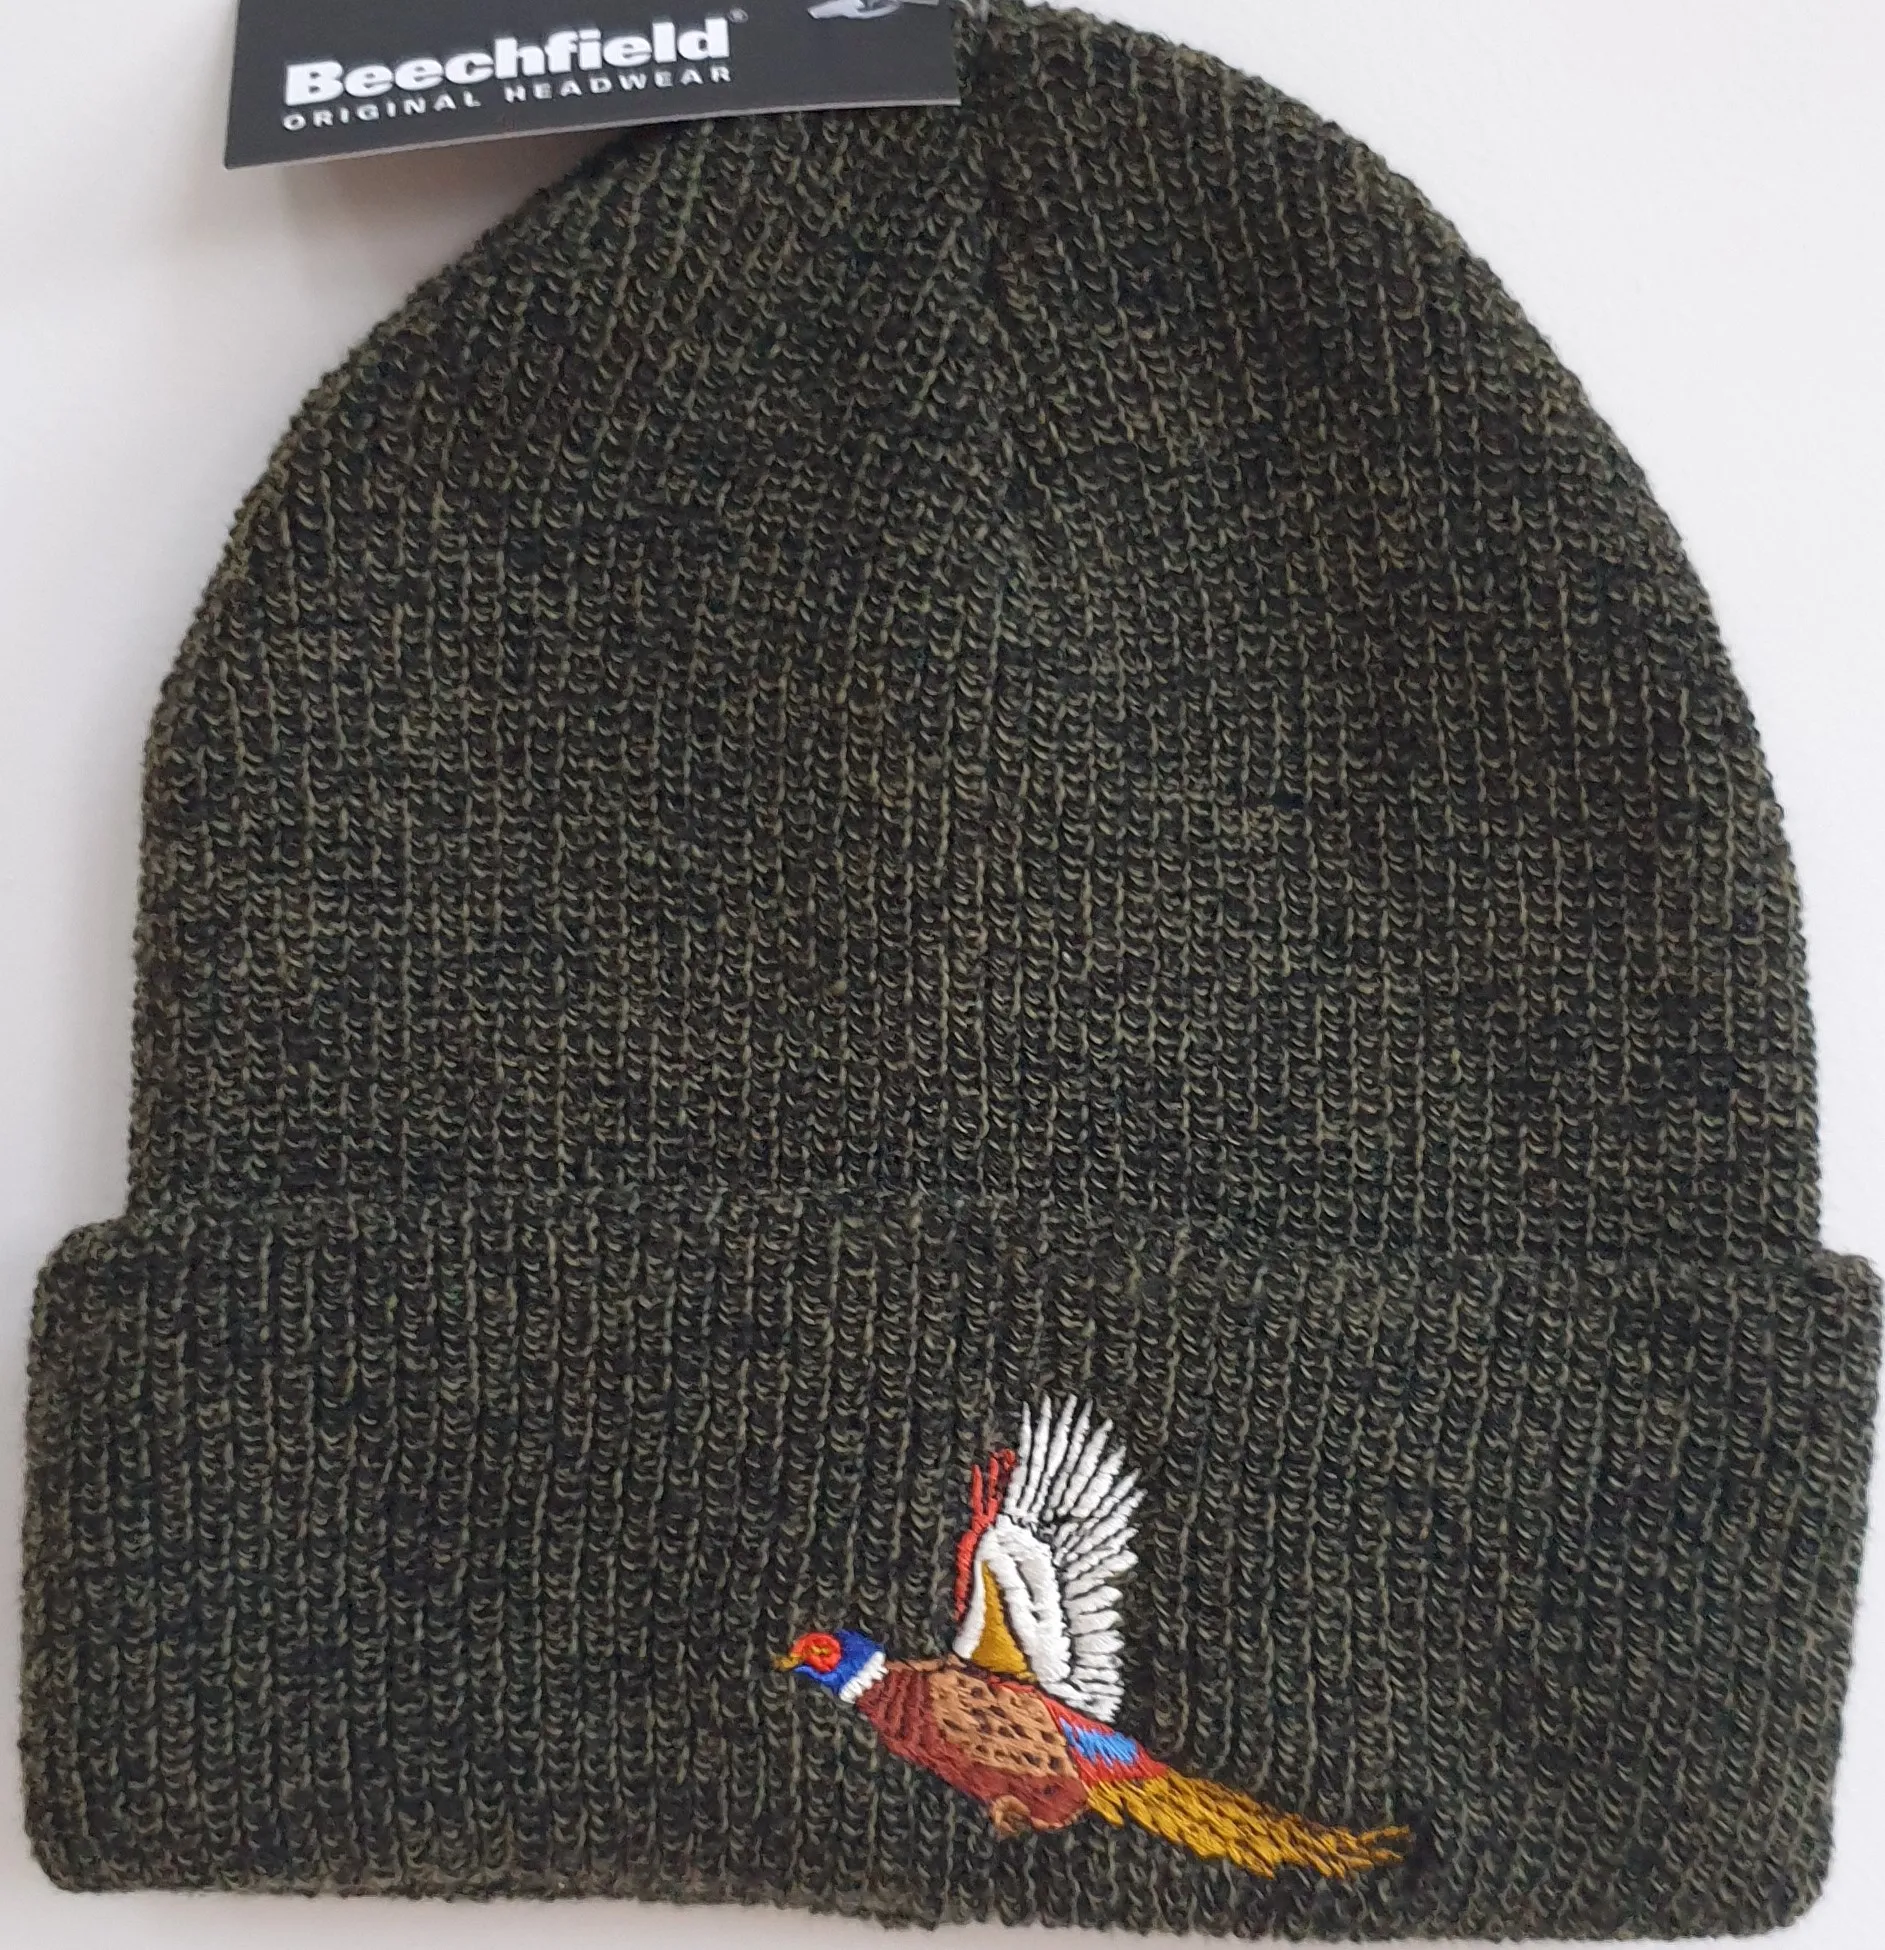 Tweed Embroidered Hats